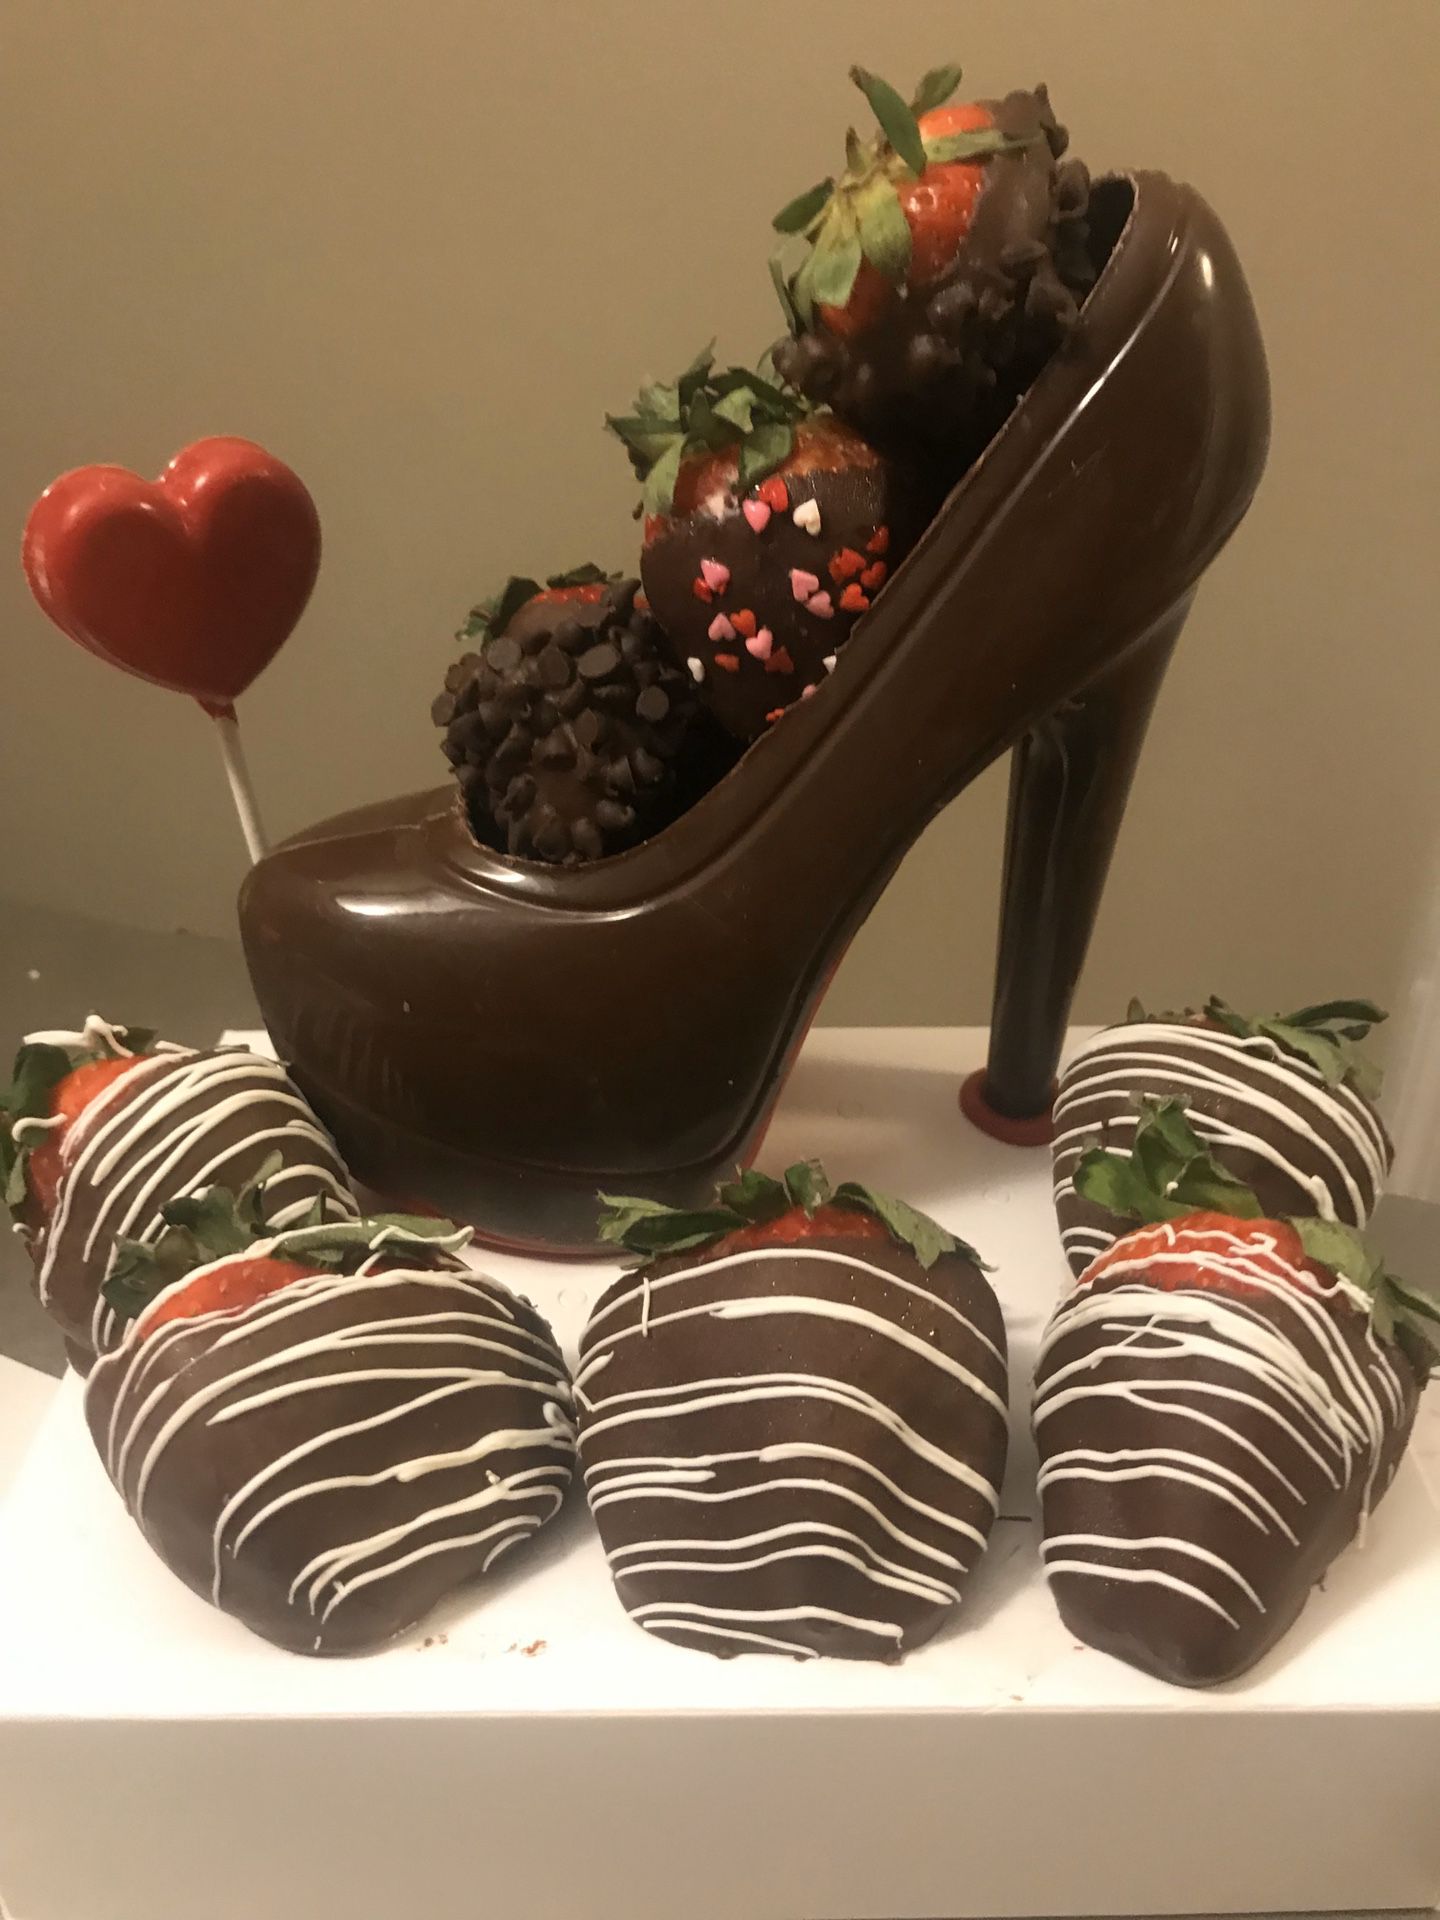 Chocolate shoe with strawberries for valentines